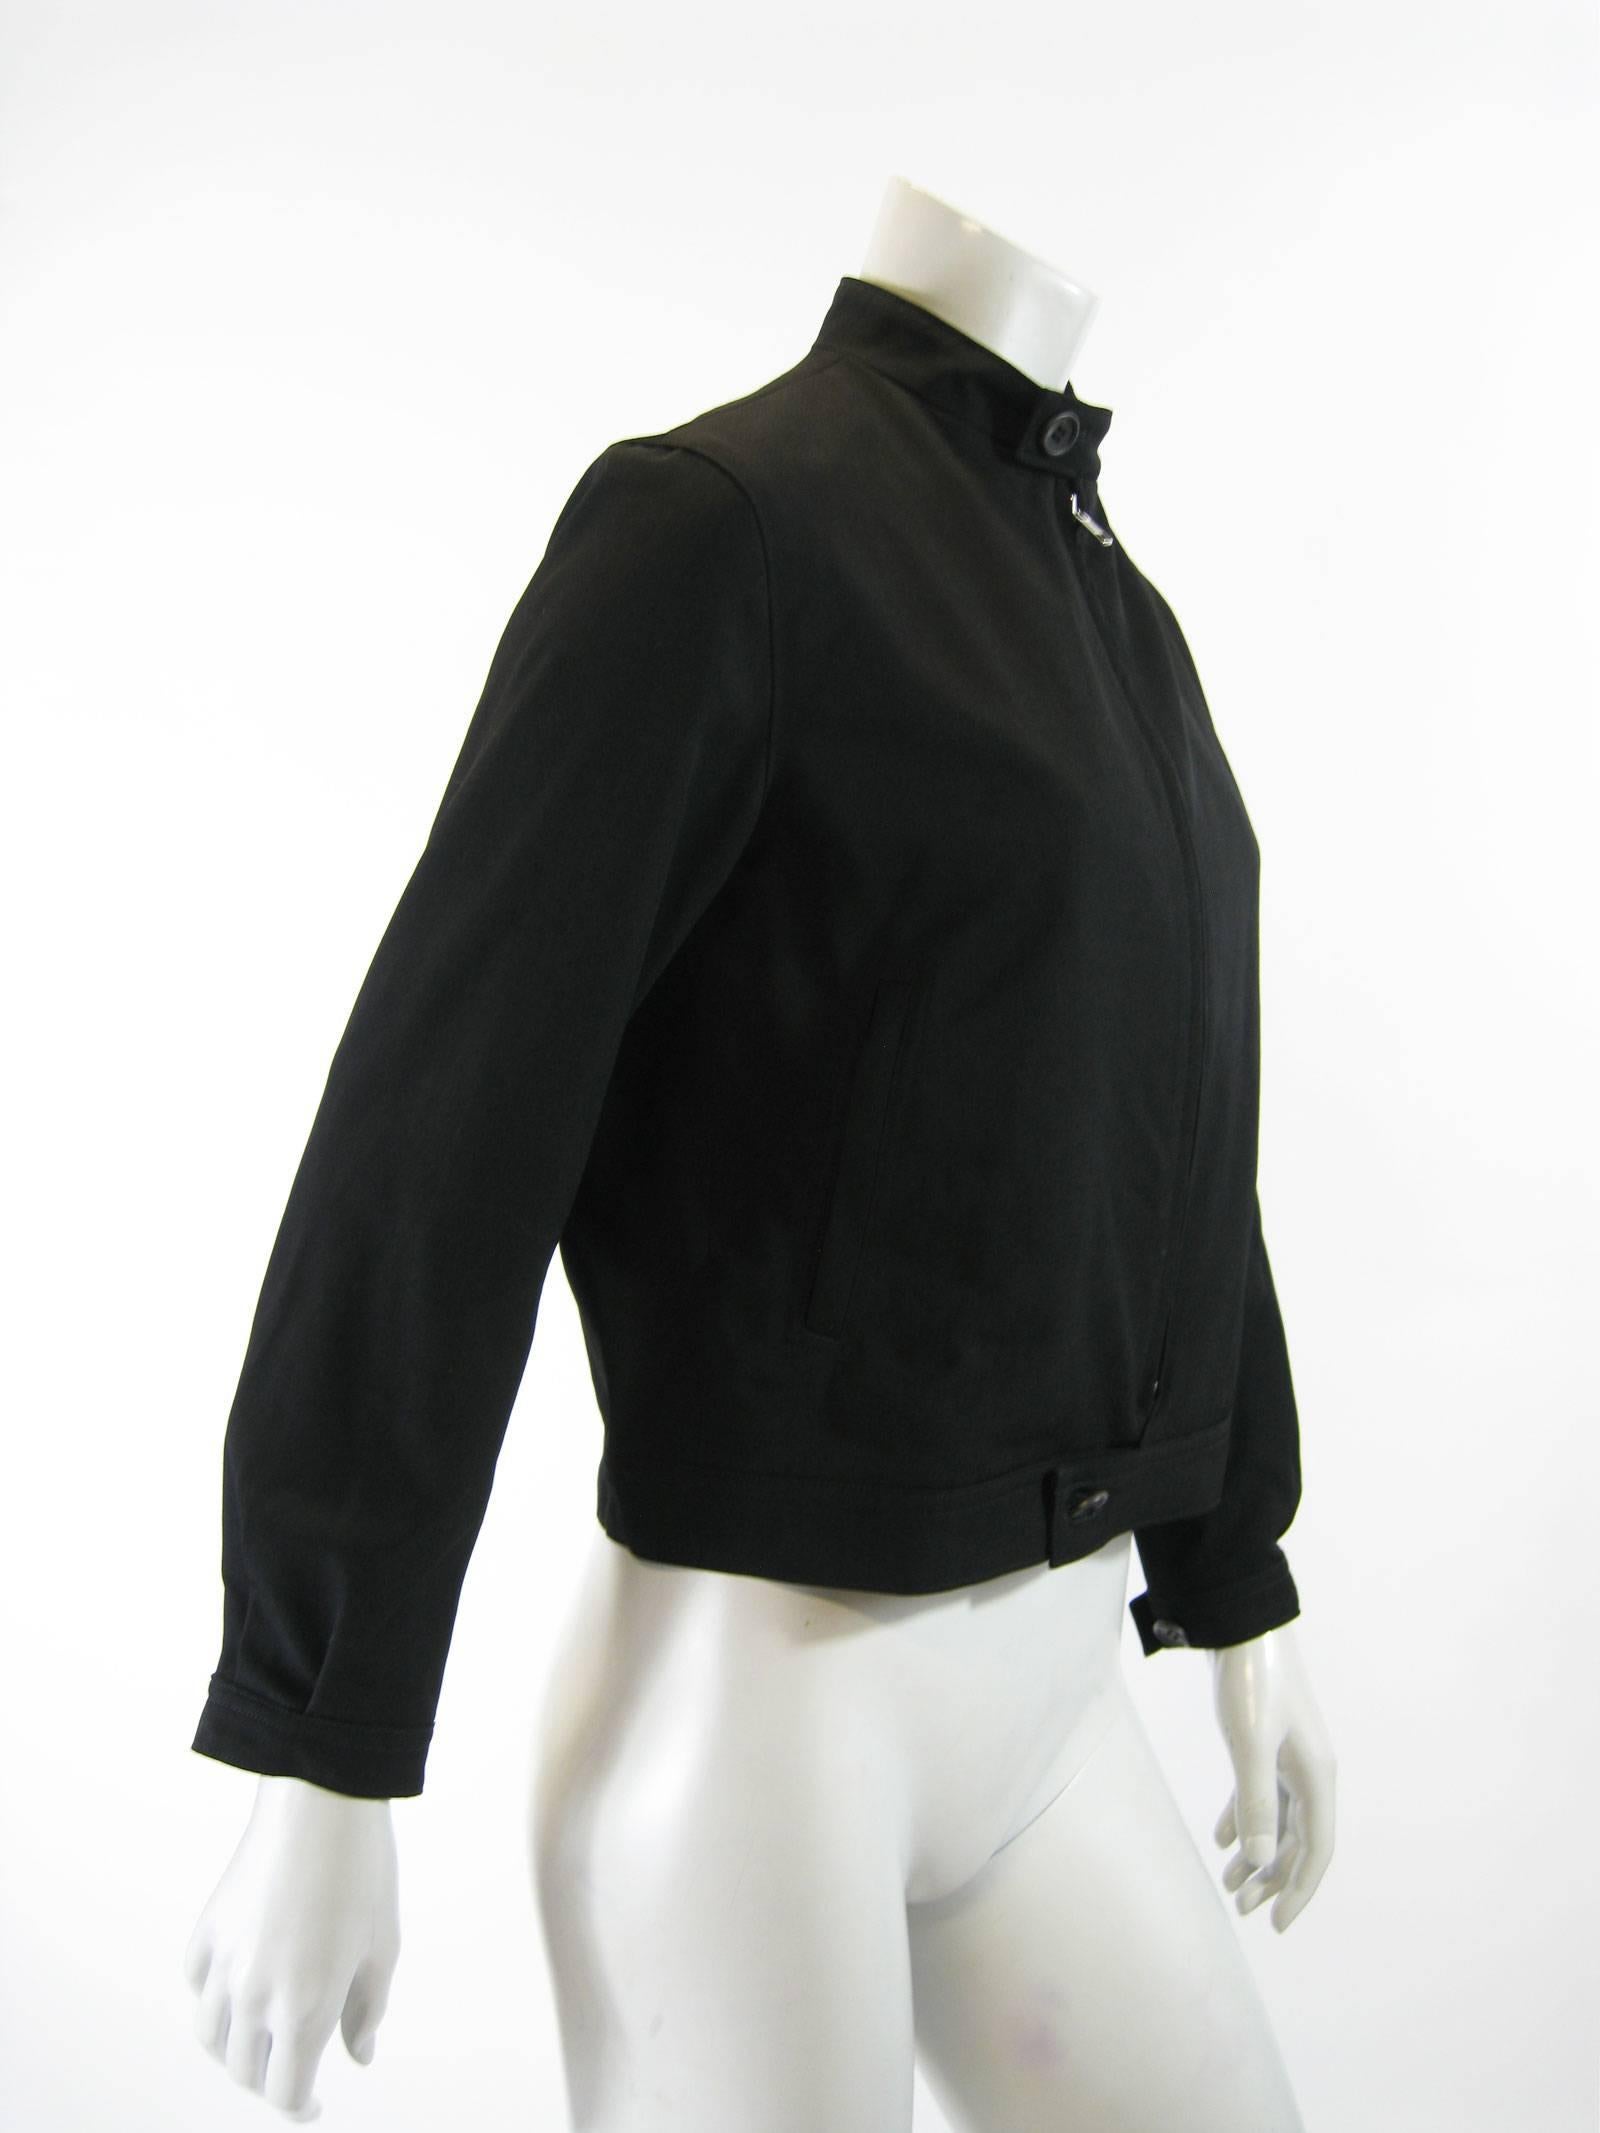 Y's by Yohji Yamamoto classic cut black bomber jacket.
Mock neck with button closure.
Sturdy two way zipper.
Button closure at waist.
Slanted side pockets.
Button closures at wrists.
Fully lined.
Tagged a size 3.

Chest: 38